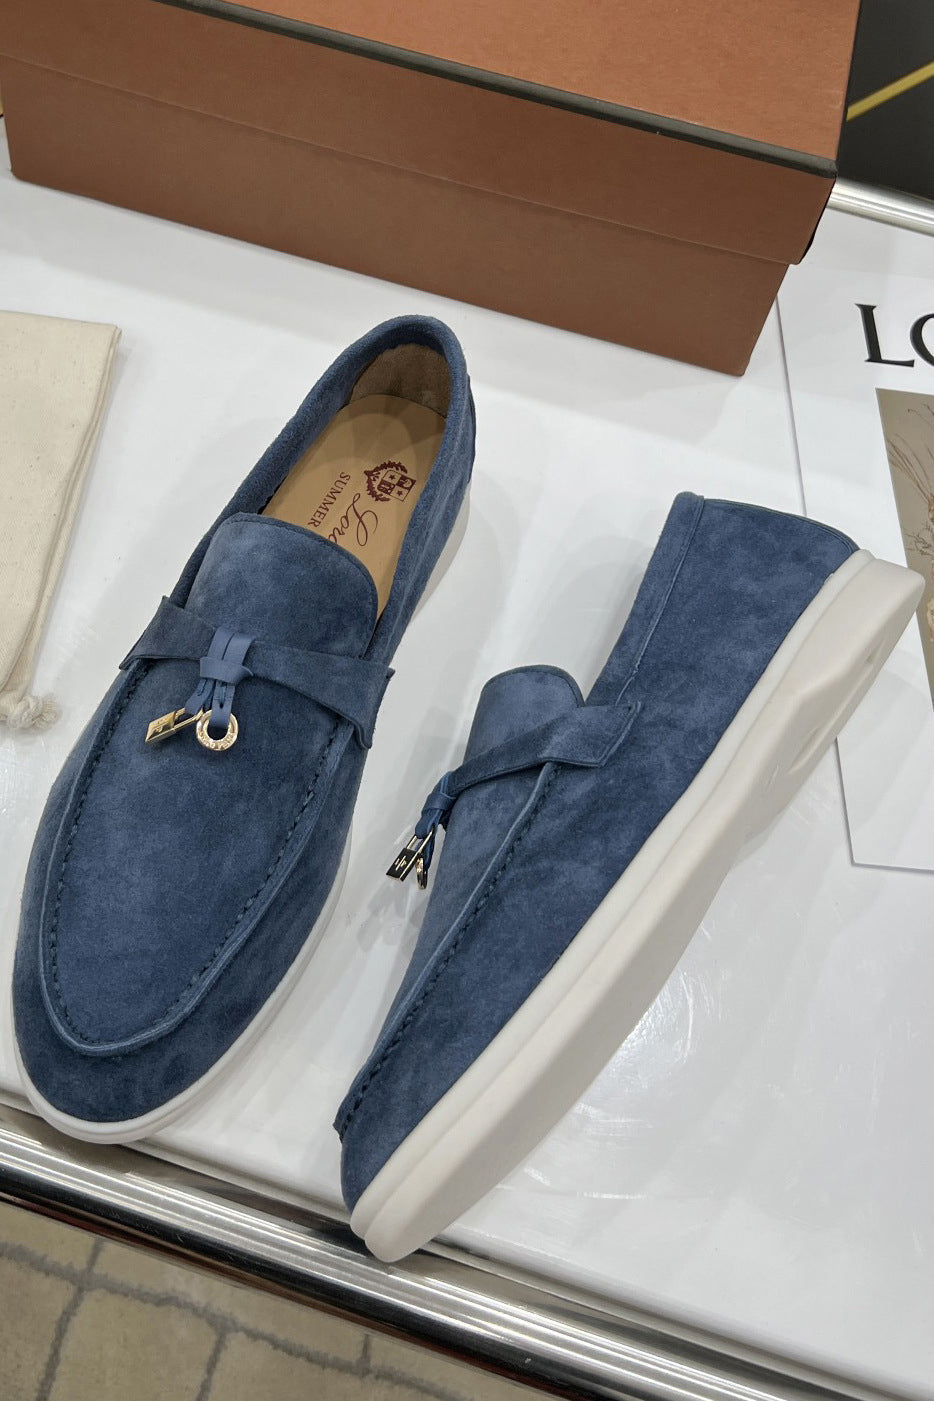 LP Summer Charms Walk Loafers (UA) - UK 4 / UK 7 / UK 8 - CLEARANCE SALE 30% OFF - SHIPS TO THE UK ONLY